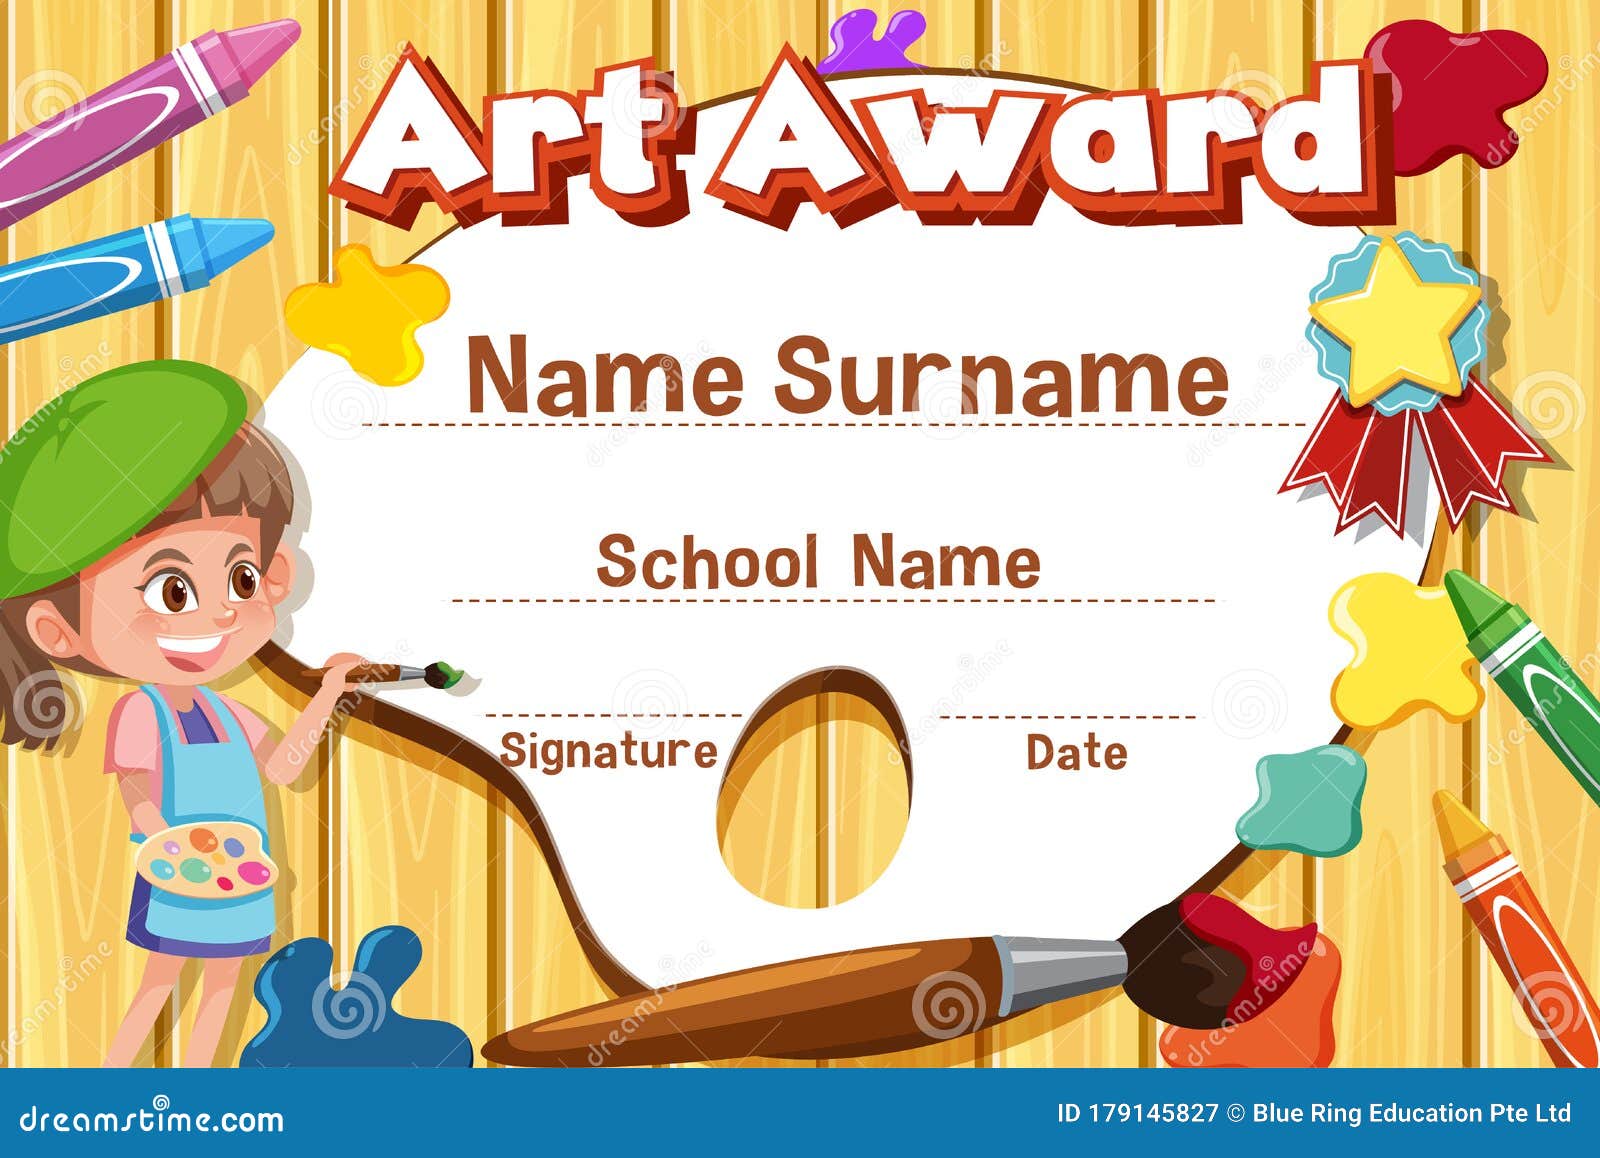 Certificate Template for Art Award with Kid Painting in Background With Art Certificate Template Free